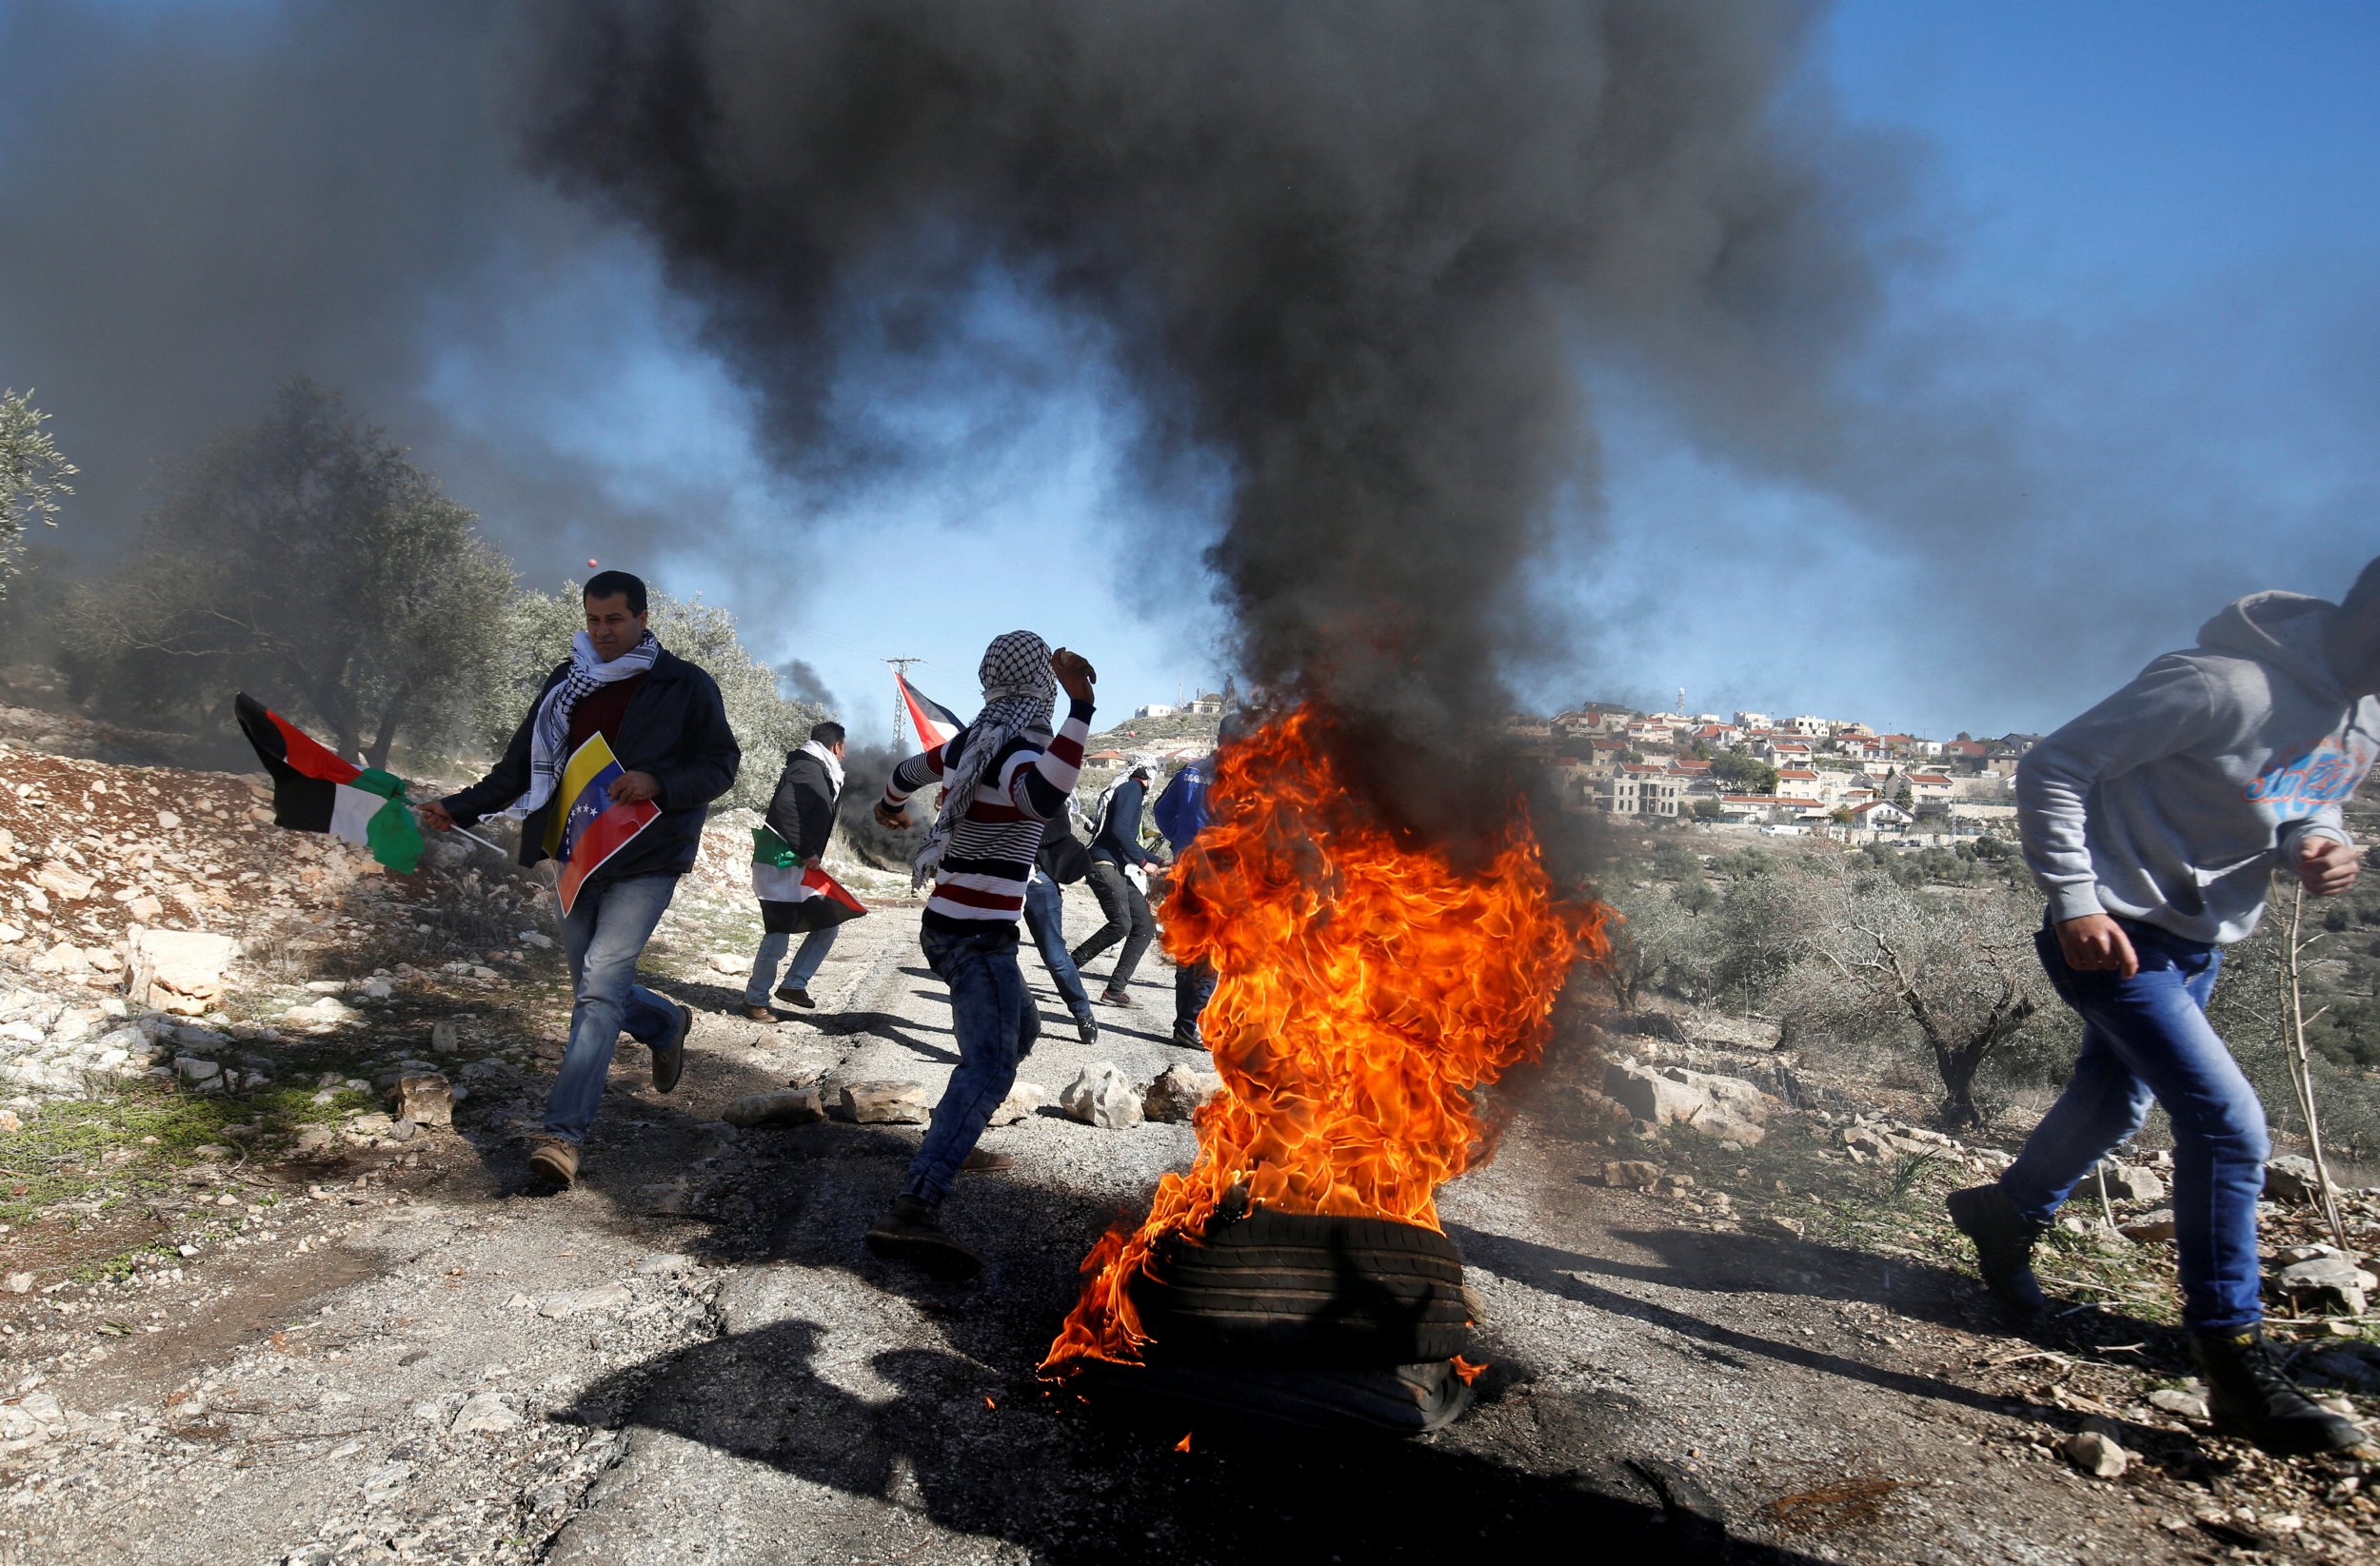 Clashes in the West Bank